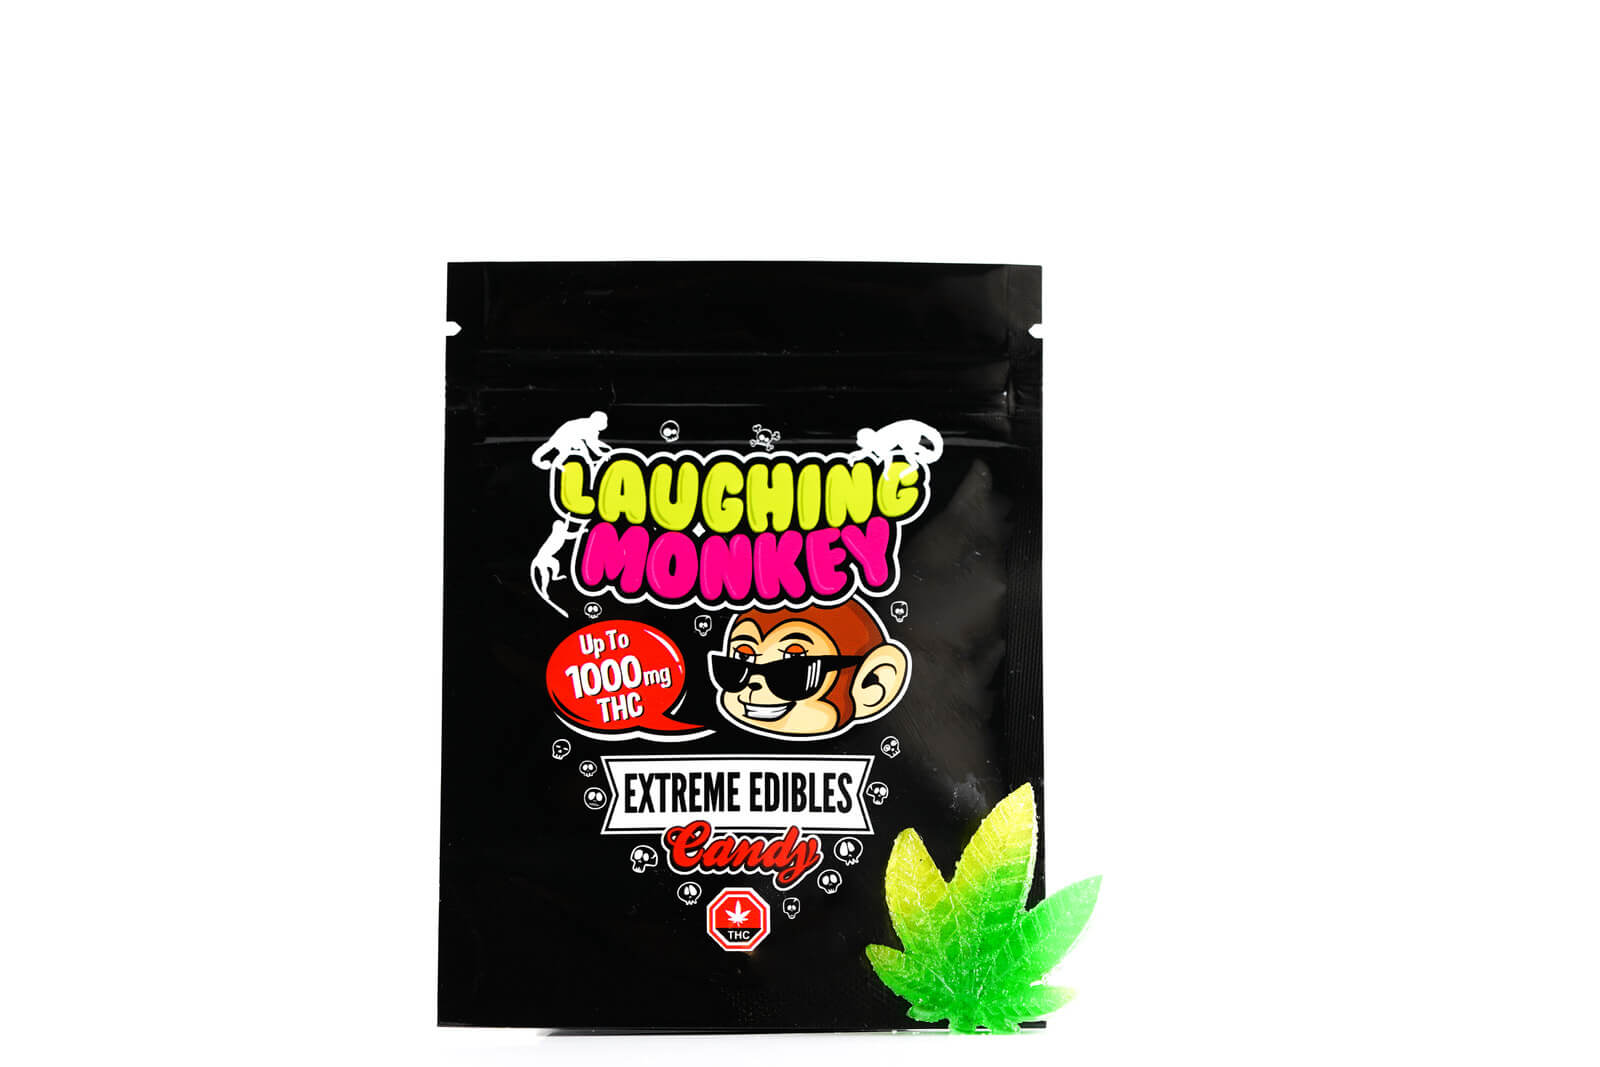 Laughing Monkey Extreme Edibles - TOP BC CANNABIS - Online Dispensary